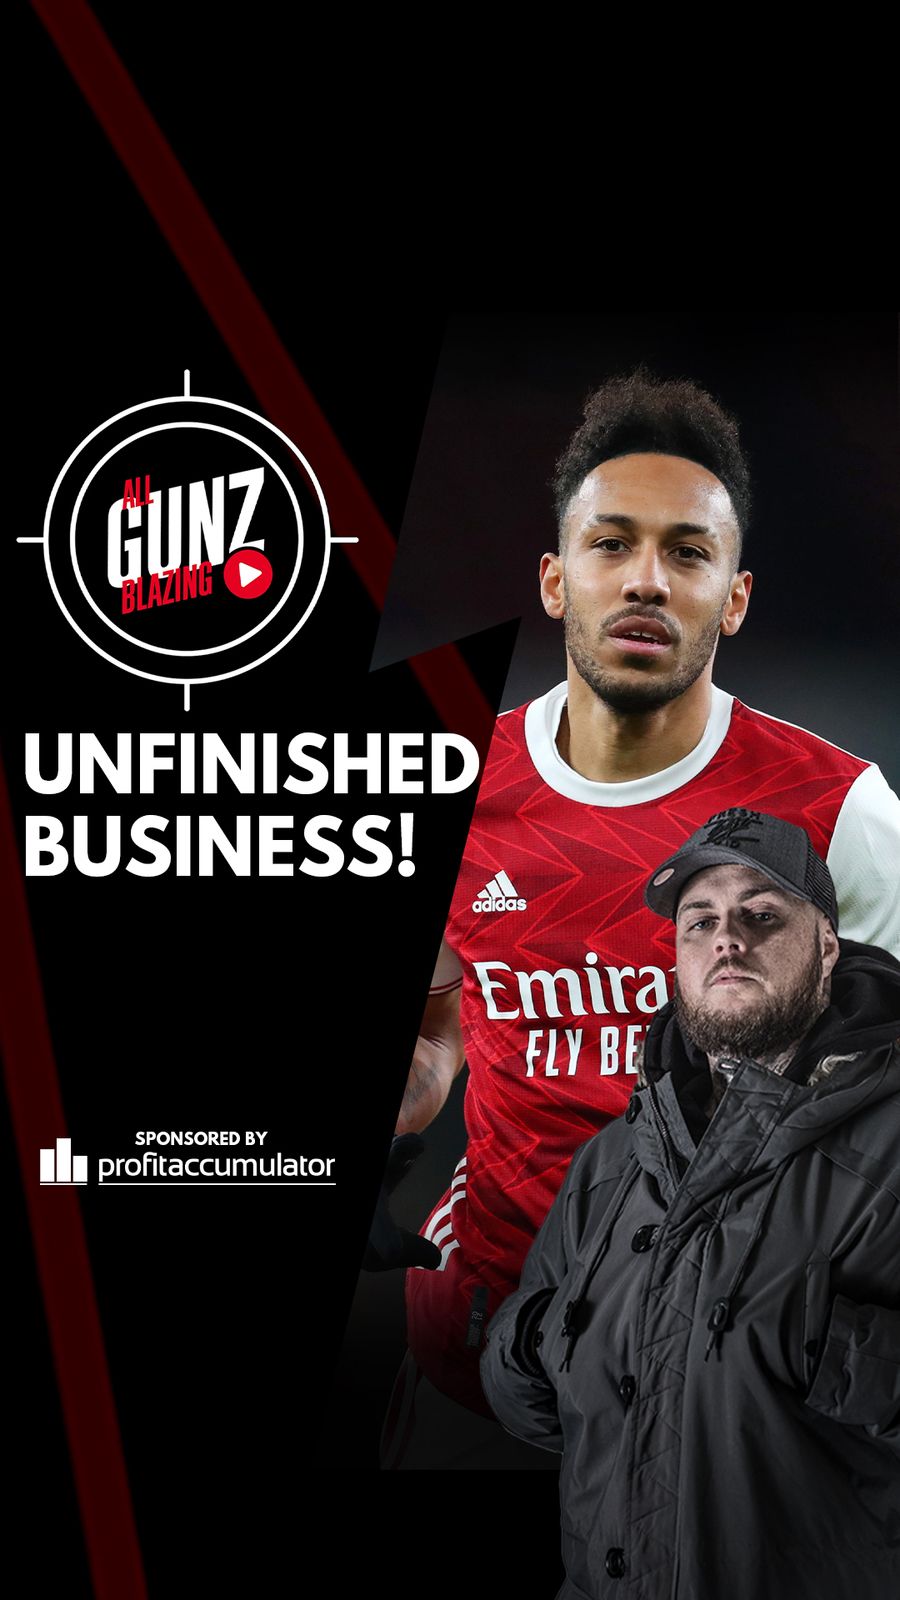 S3 Ep84: Unfinished Business! | All Gunz Blazing Podcast